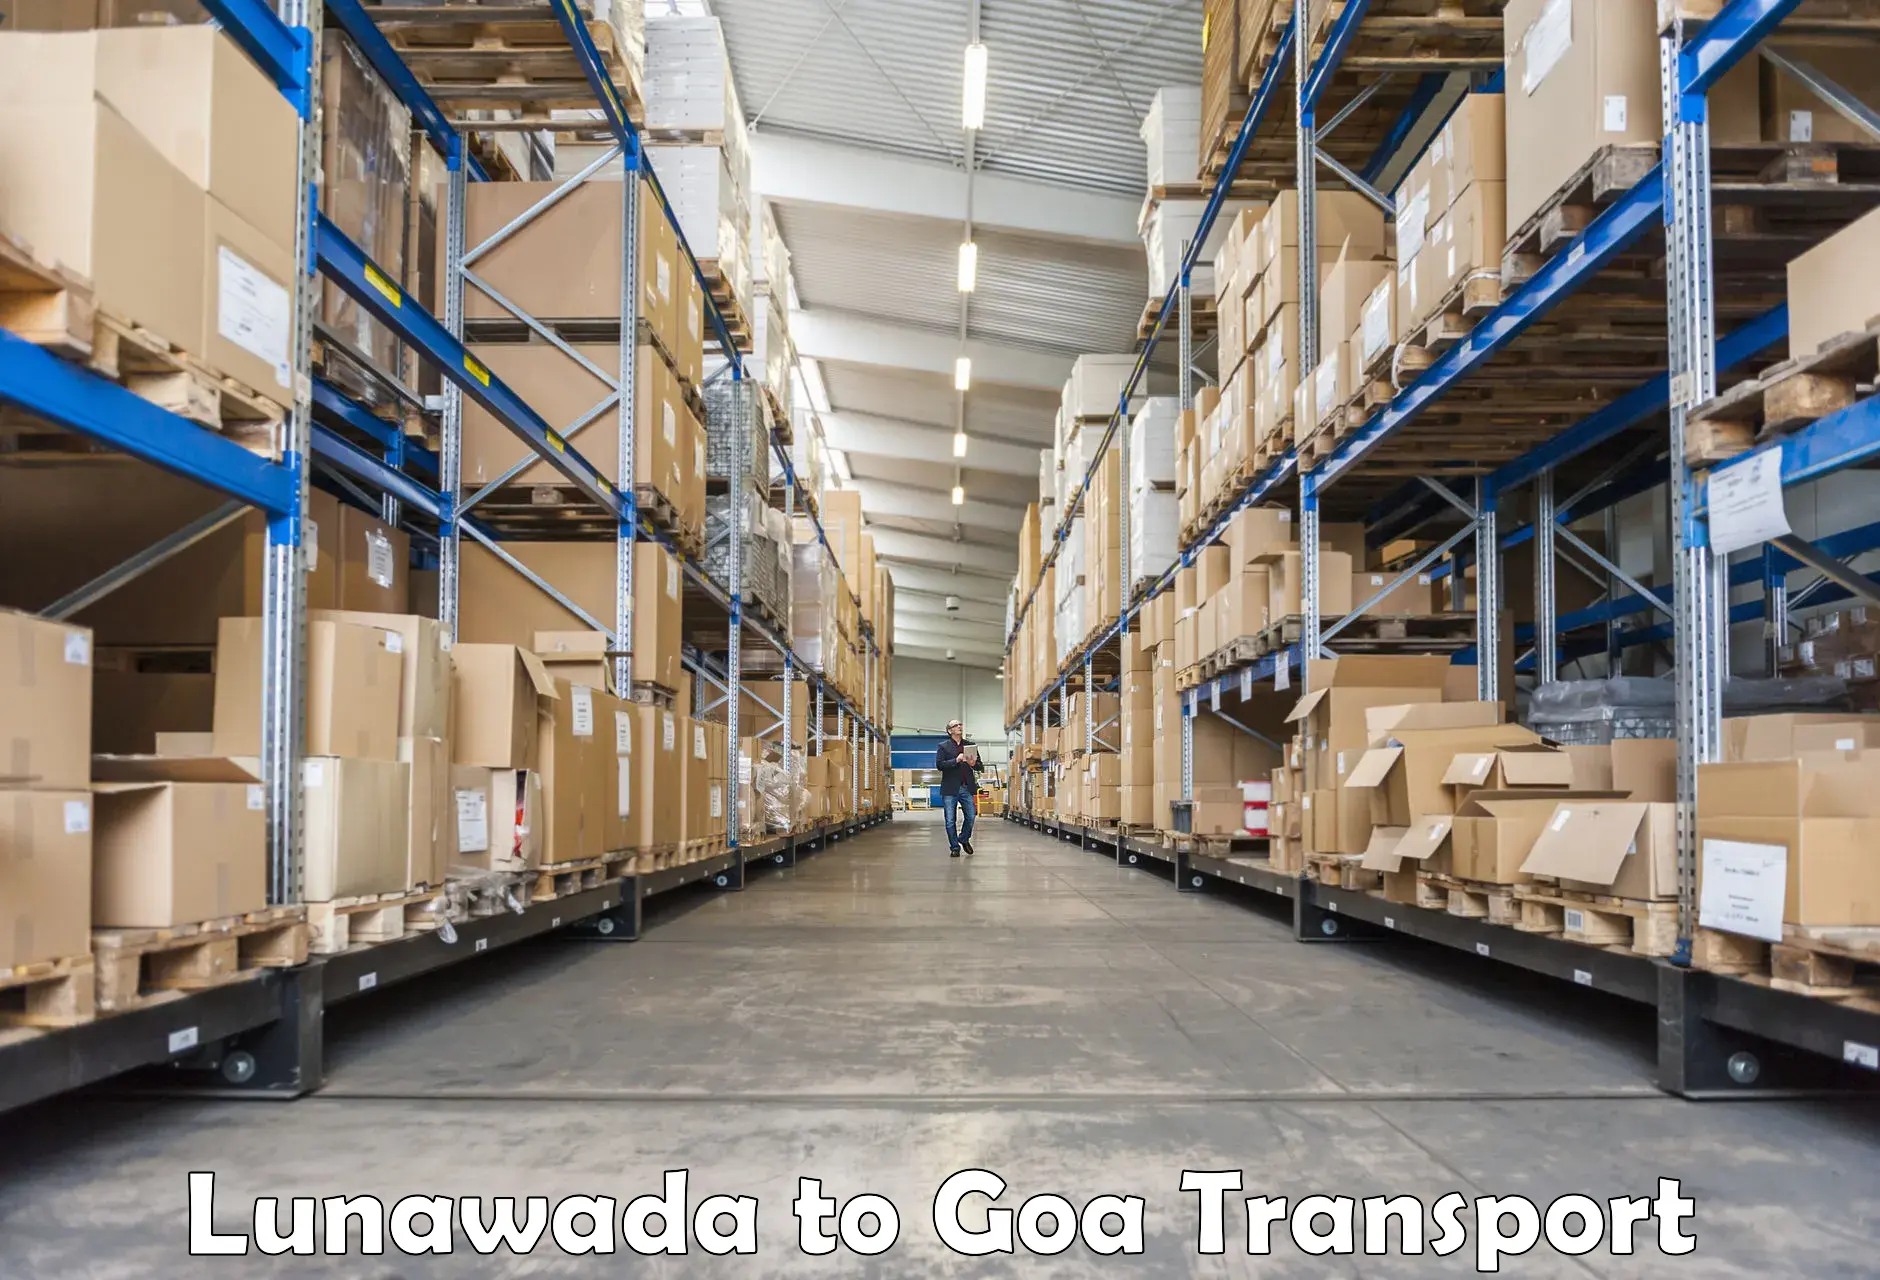 Nationwide transport services Lunawada to South Goa